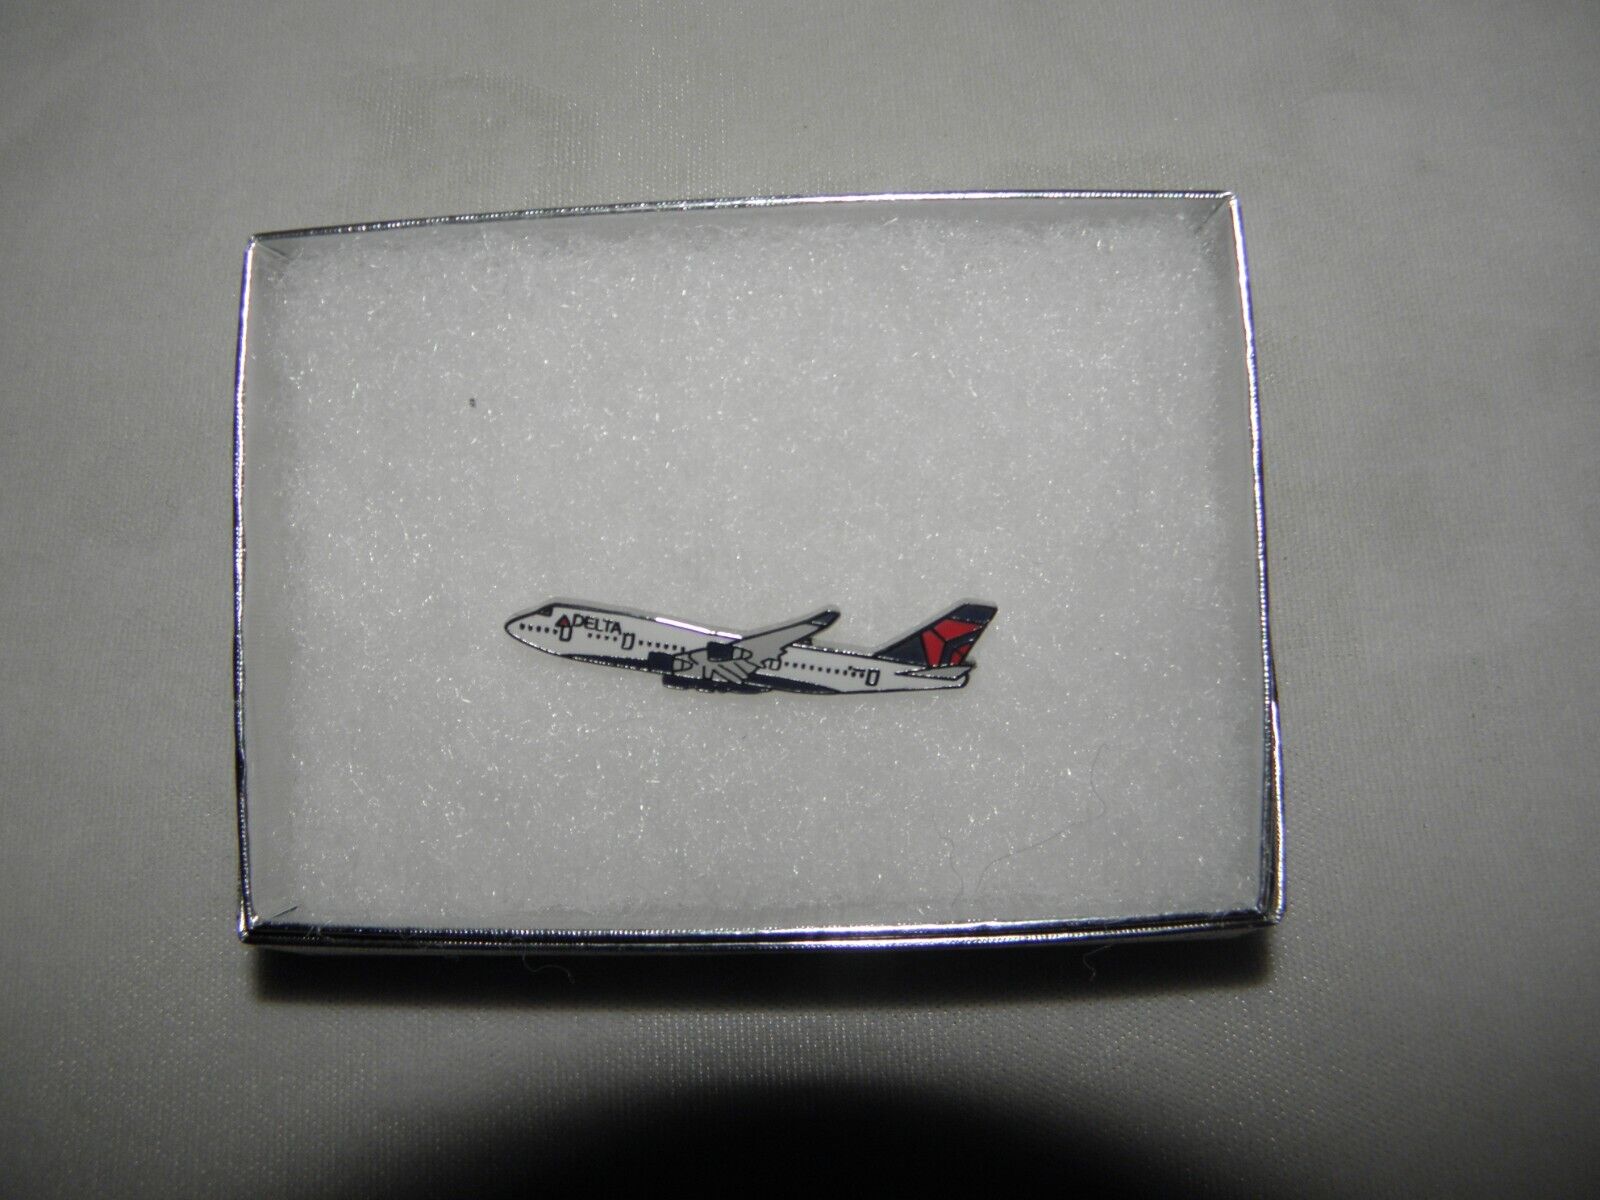 DELTA AIRLINES BOEING 747 AIRPLANE LAPEL TACK PIN PILOT F/A CHRISTMAS GIFT NEW